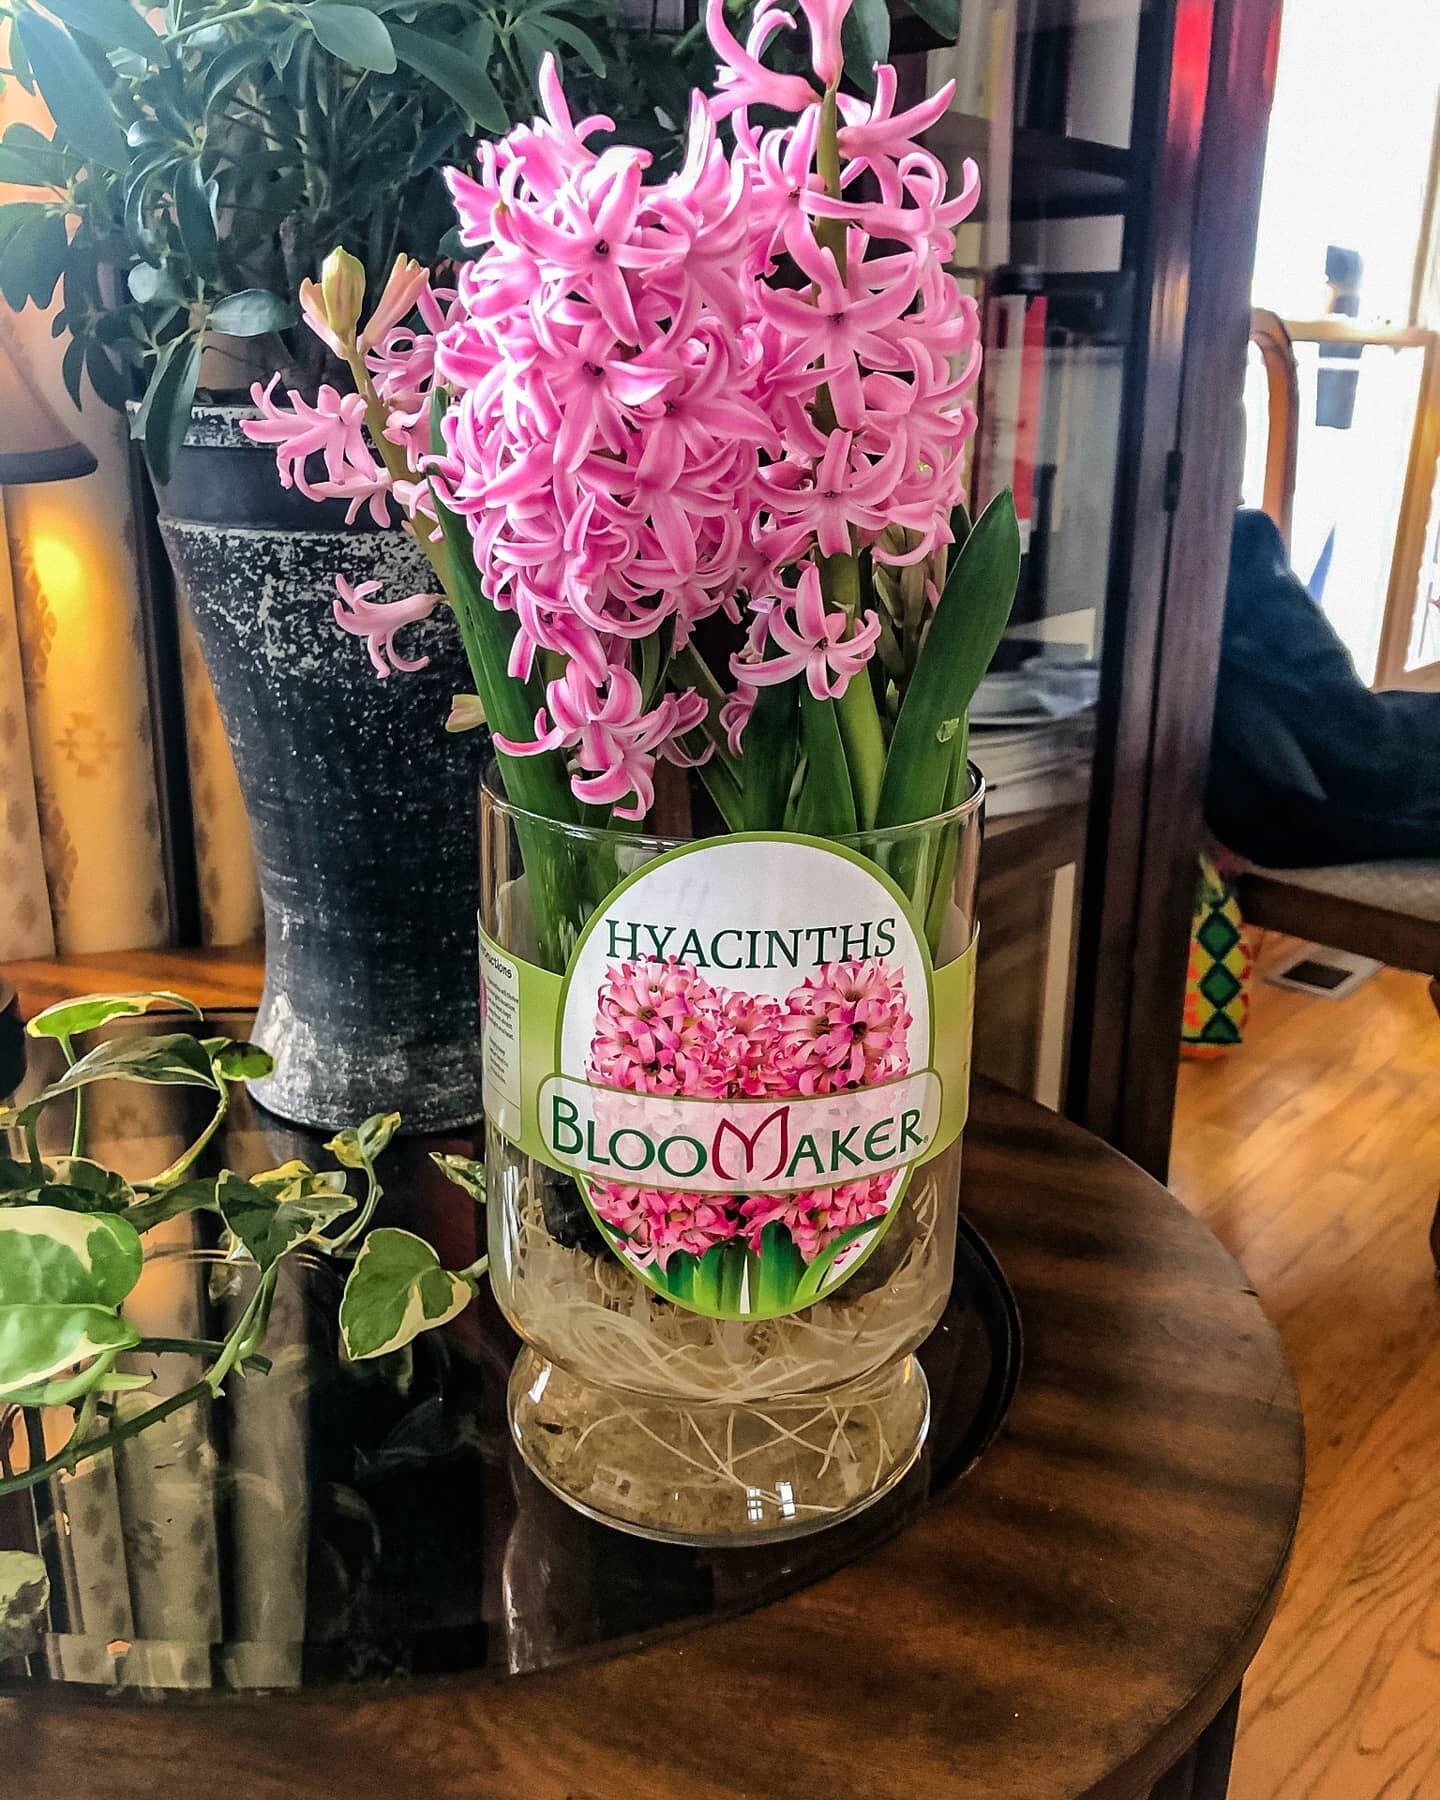 Look on the pink side of life! 💗 ➡️ Our Hyacinth bulbs are hand-picked for the highest quality in the Netherlands and sent to our U.S. based greenhouses to help them grow hydroponically into beautiful blooms. 
⠀
🌷 Where to find Bloomaker products? 